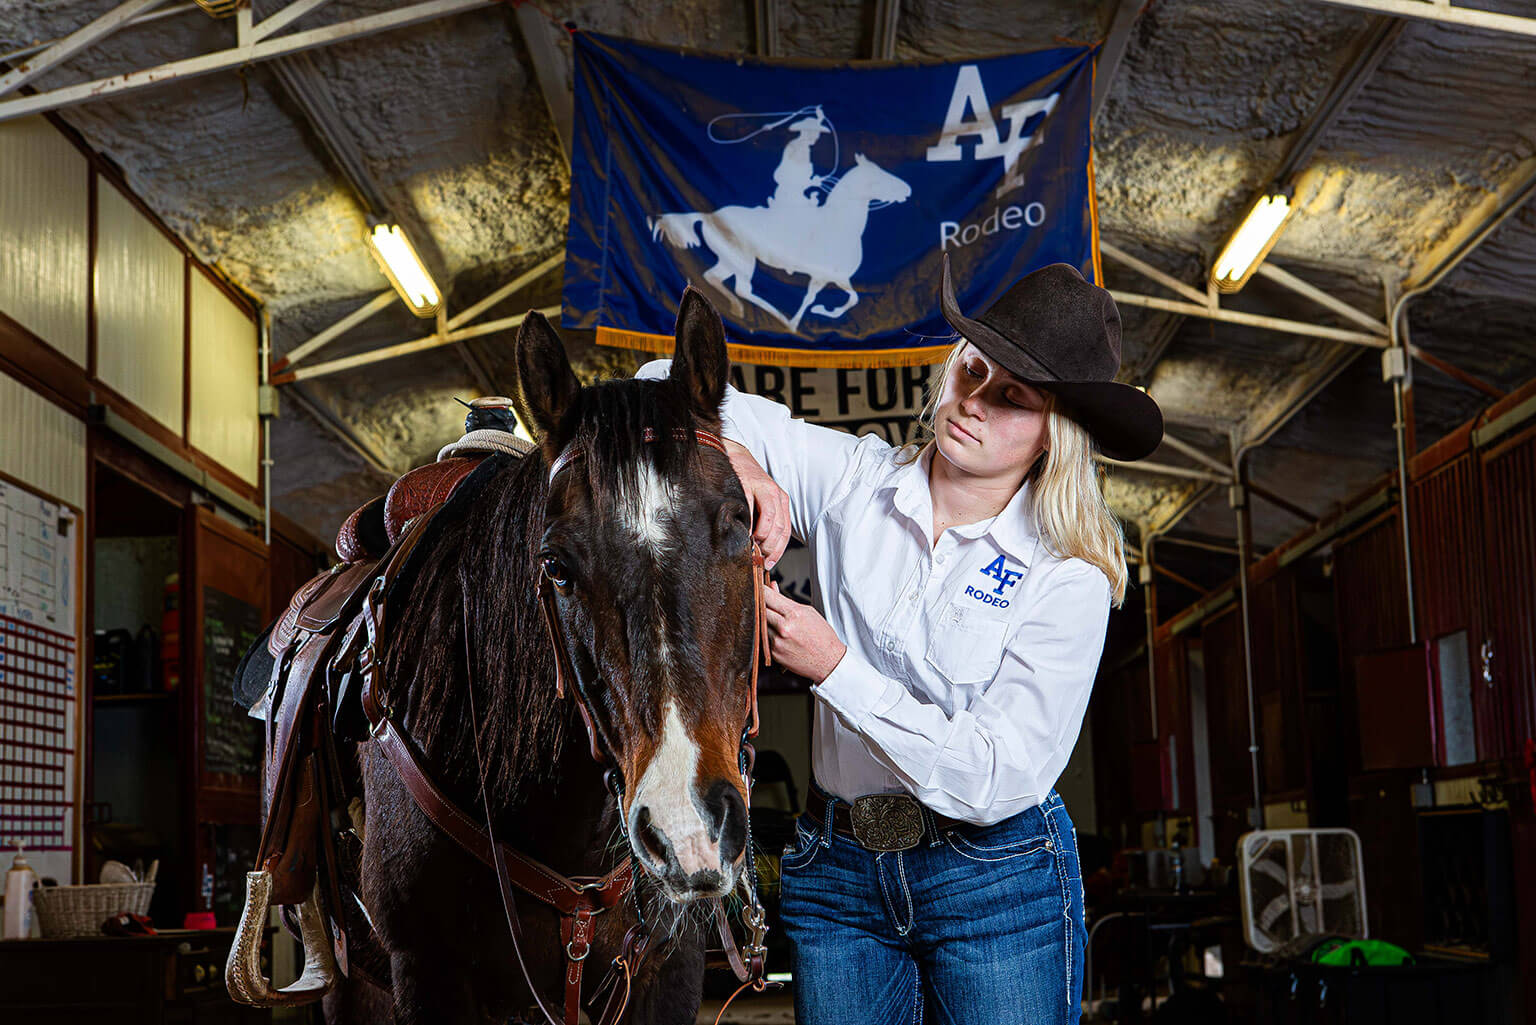 Cadet 2nd Class Colette McClanahan saddles her horse, Bear, in the U.S. Air Force Academy Rodeo Club barn.